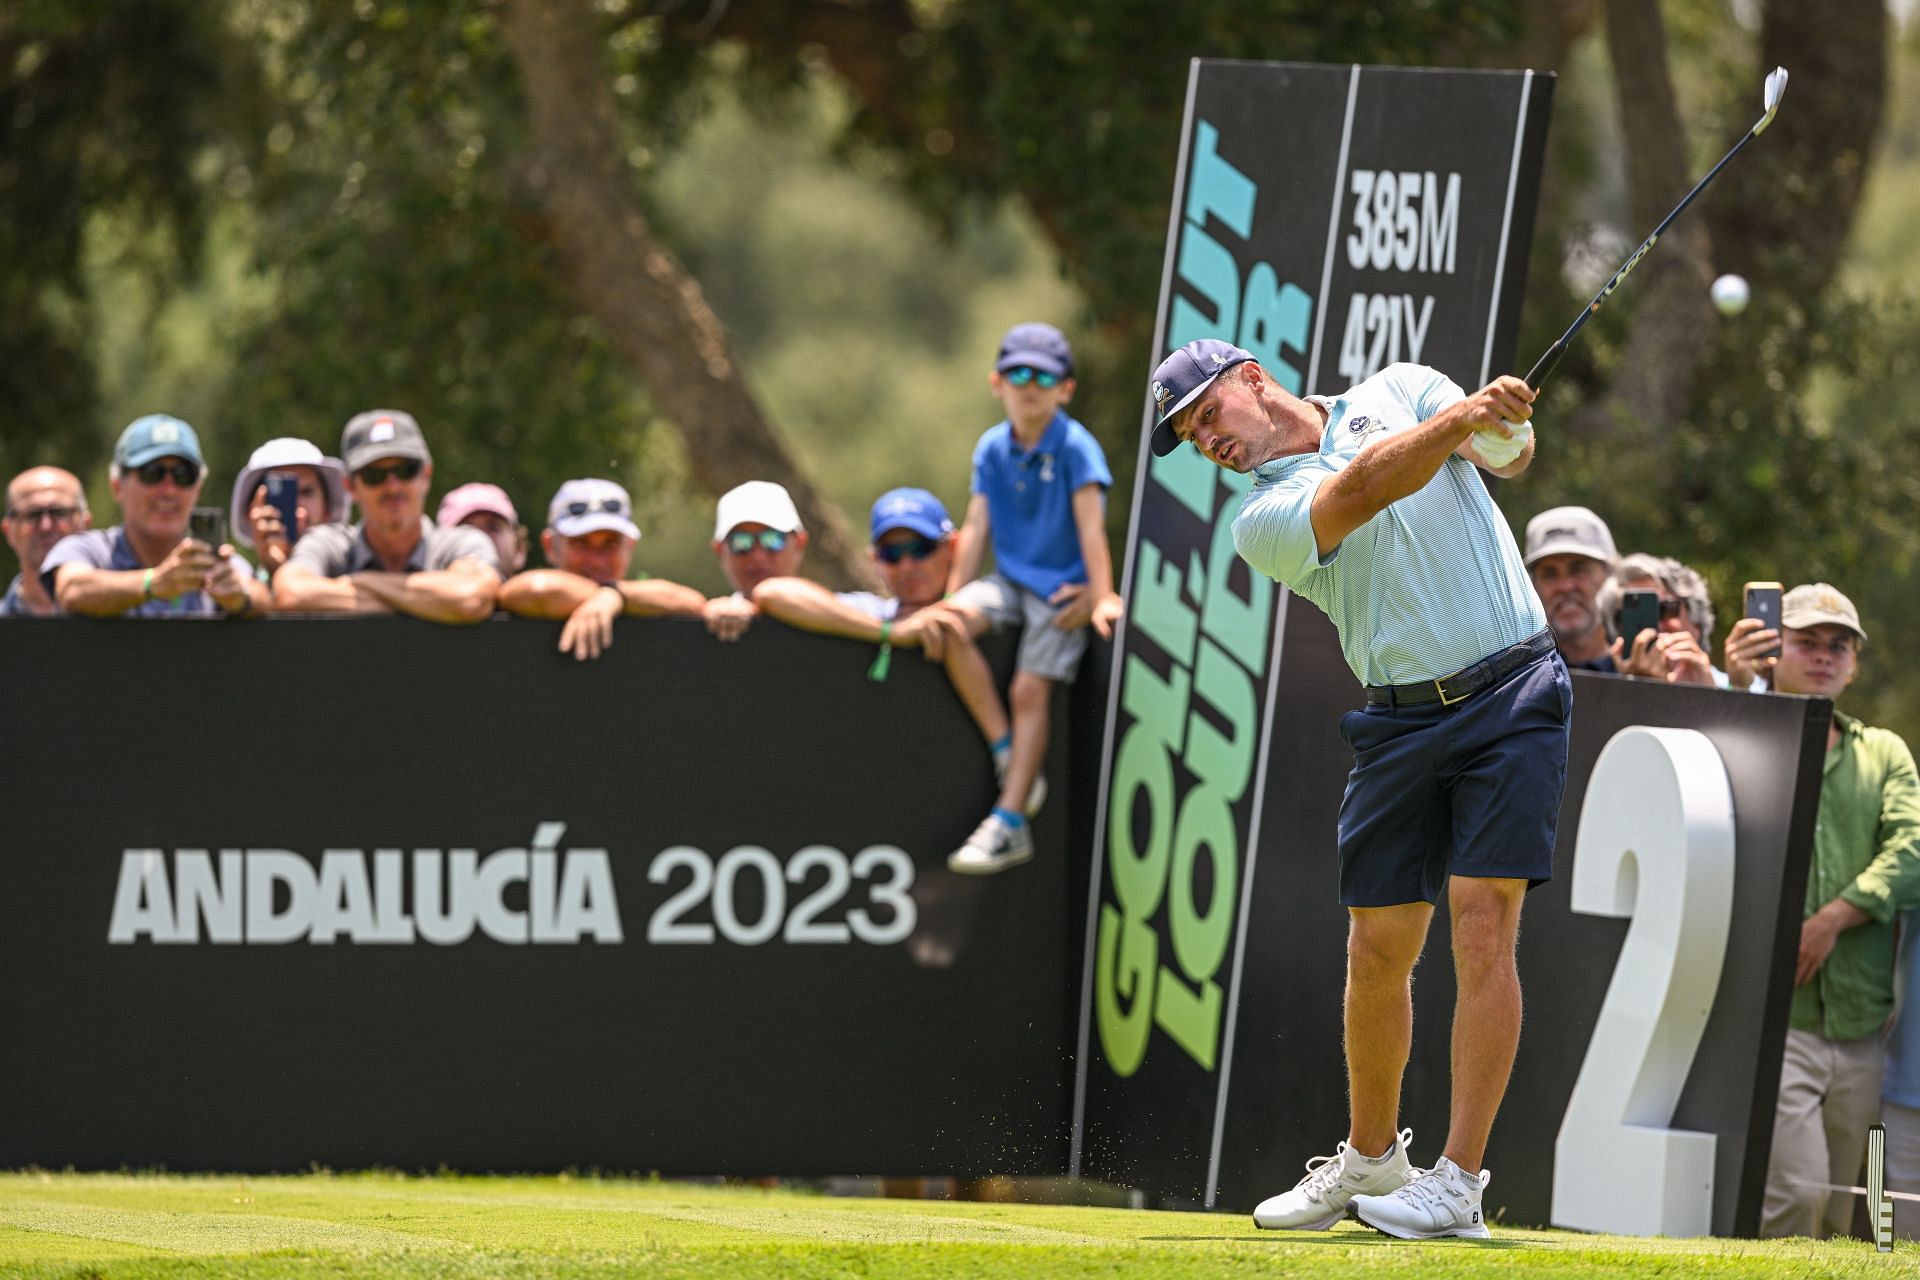 Bryson DeChambeau at the LIV Golf Andalucia (via Getty Images)